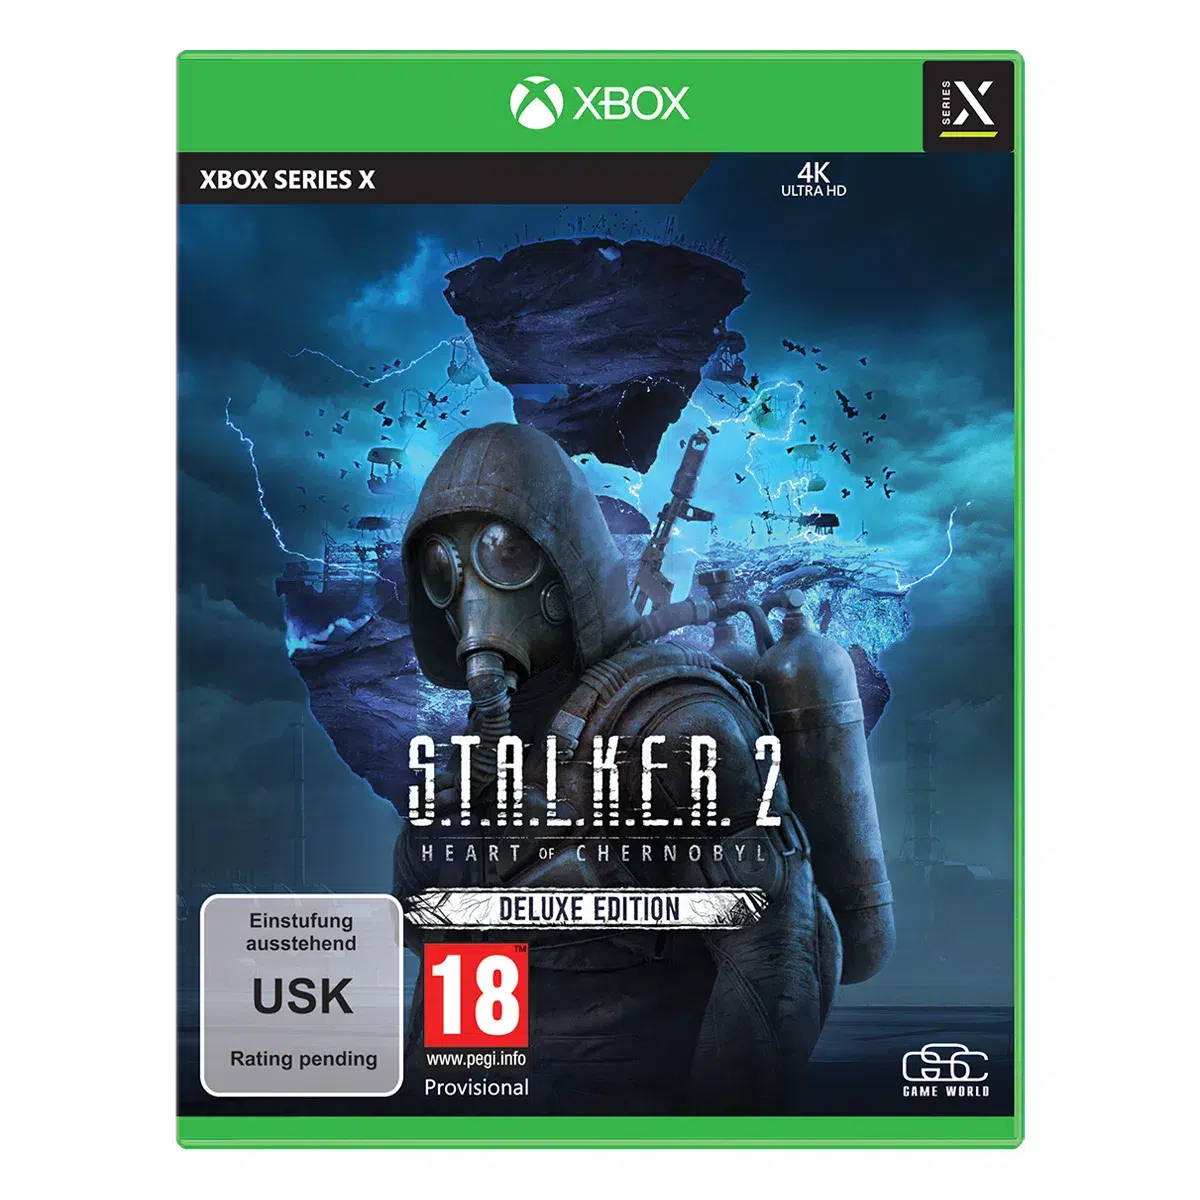 S.T.A.L.K.E.R. 2: Heart of Chornobyl Collector's Edition (XSRX) (INT)